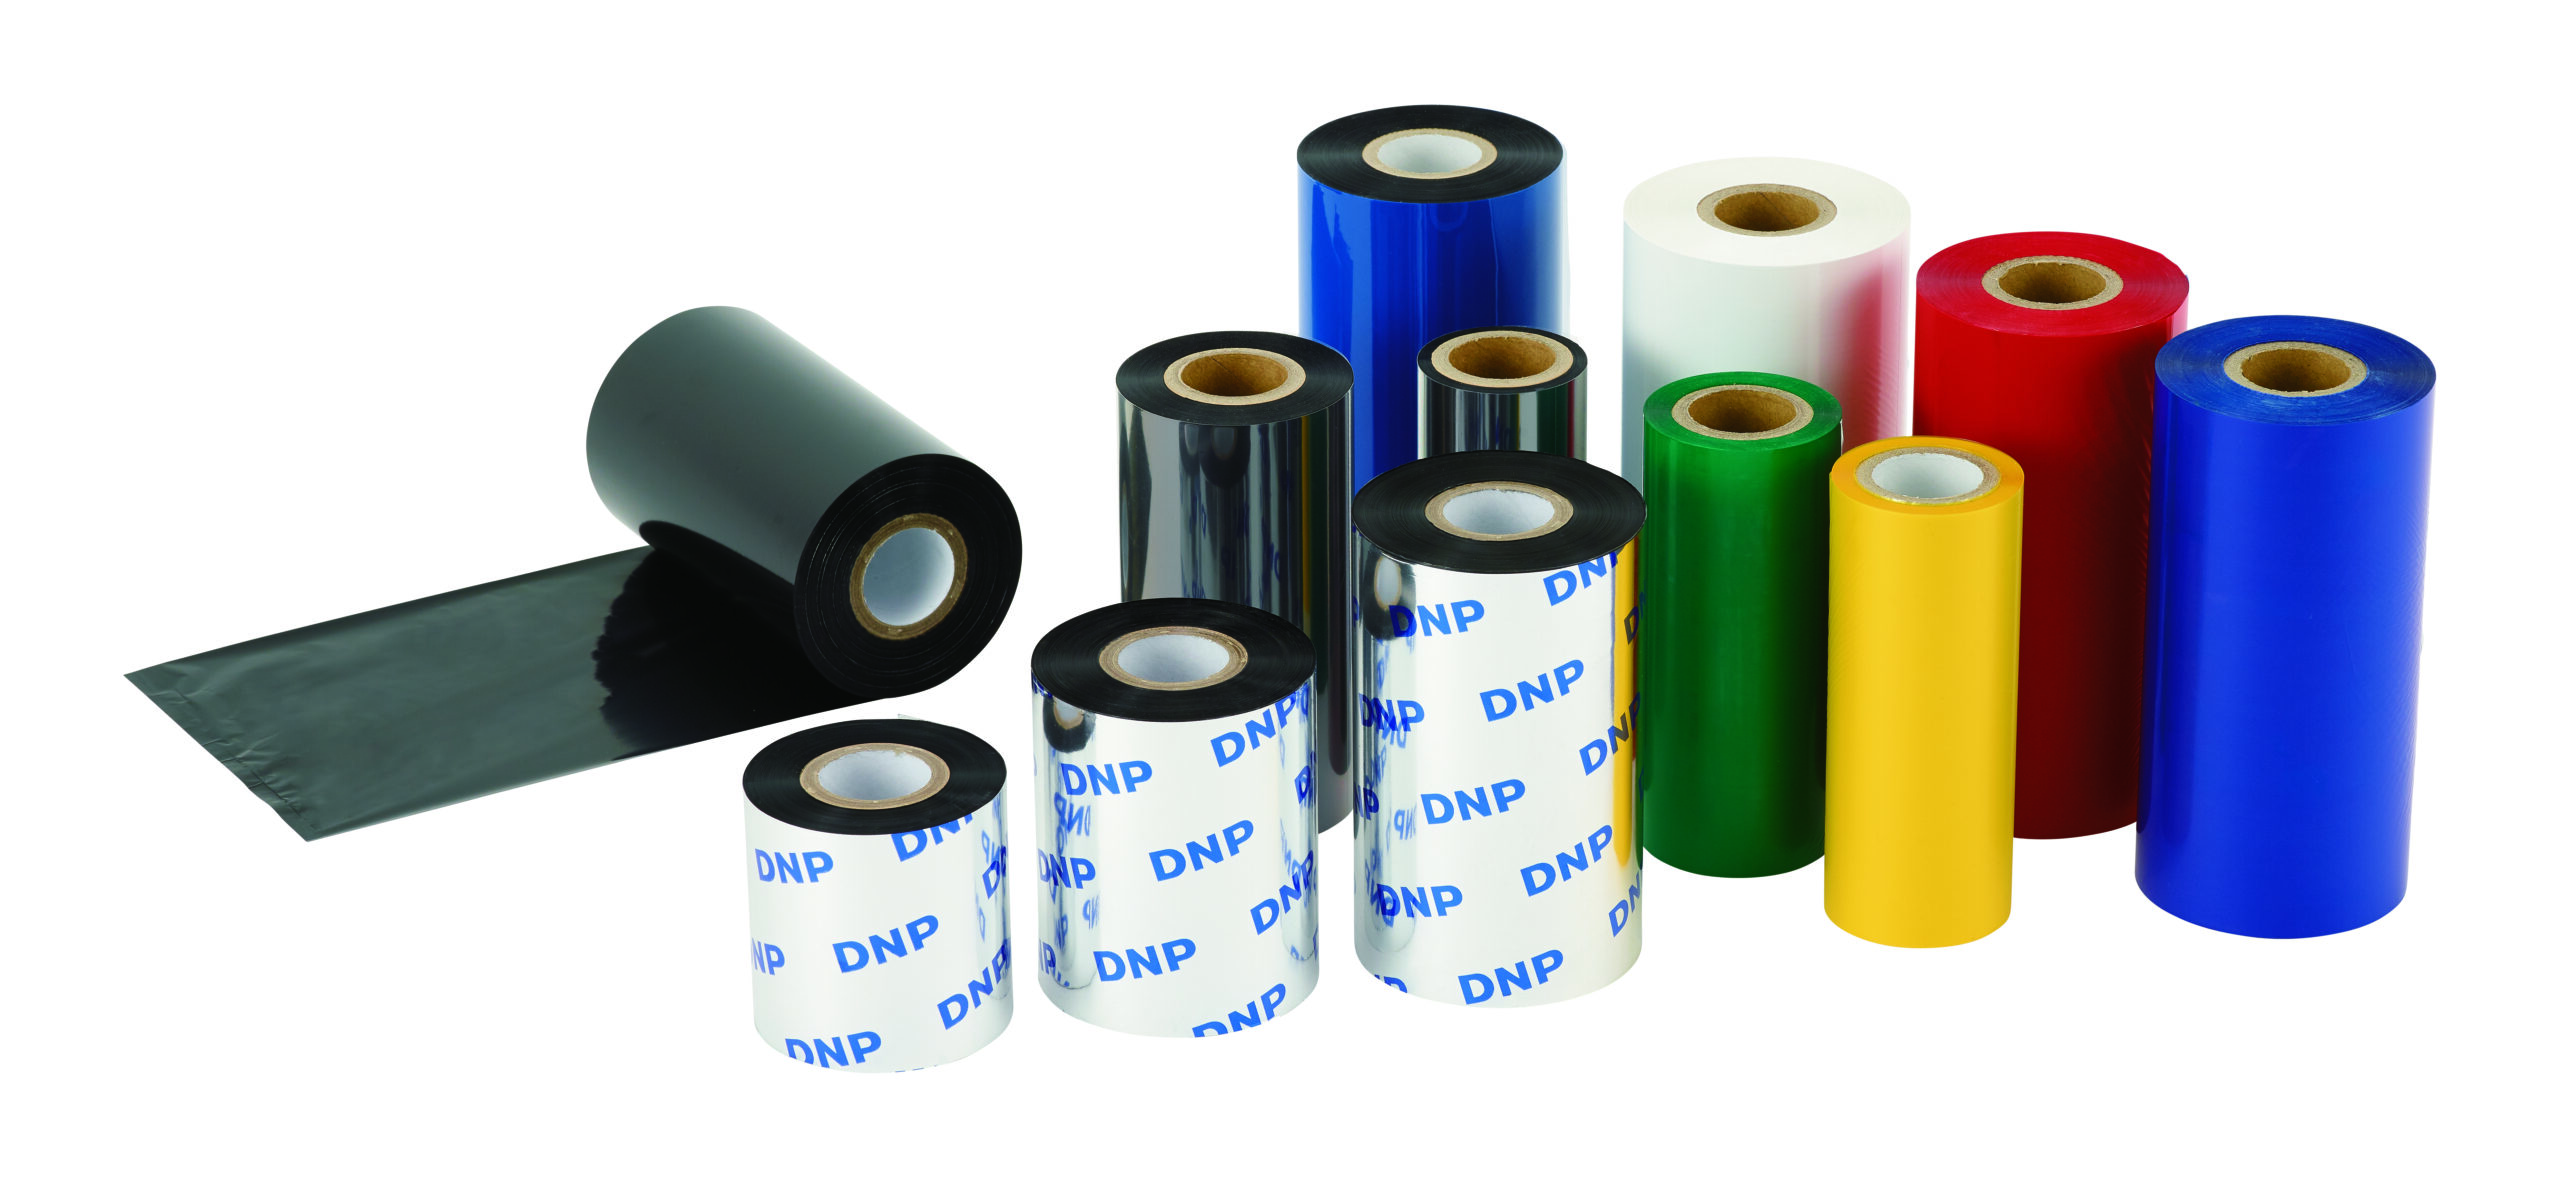 Black and colorful thermal transfer ribbons